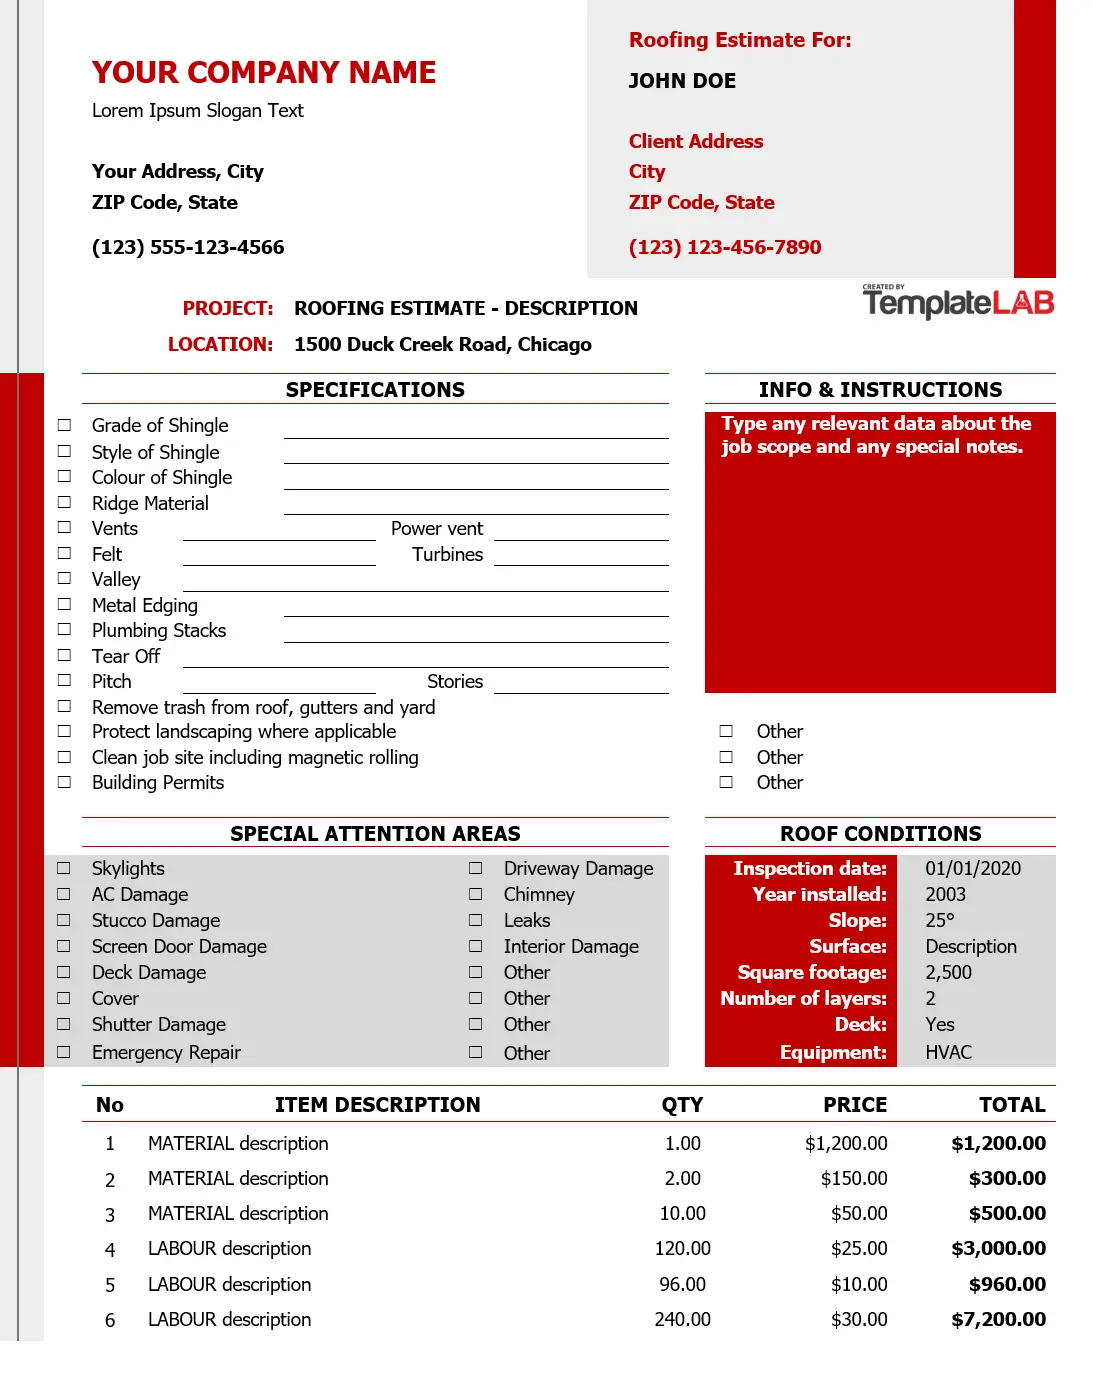 Download Roofing Estimate Template in 2020